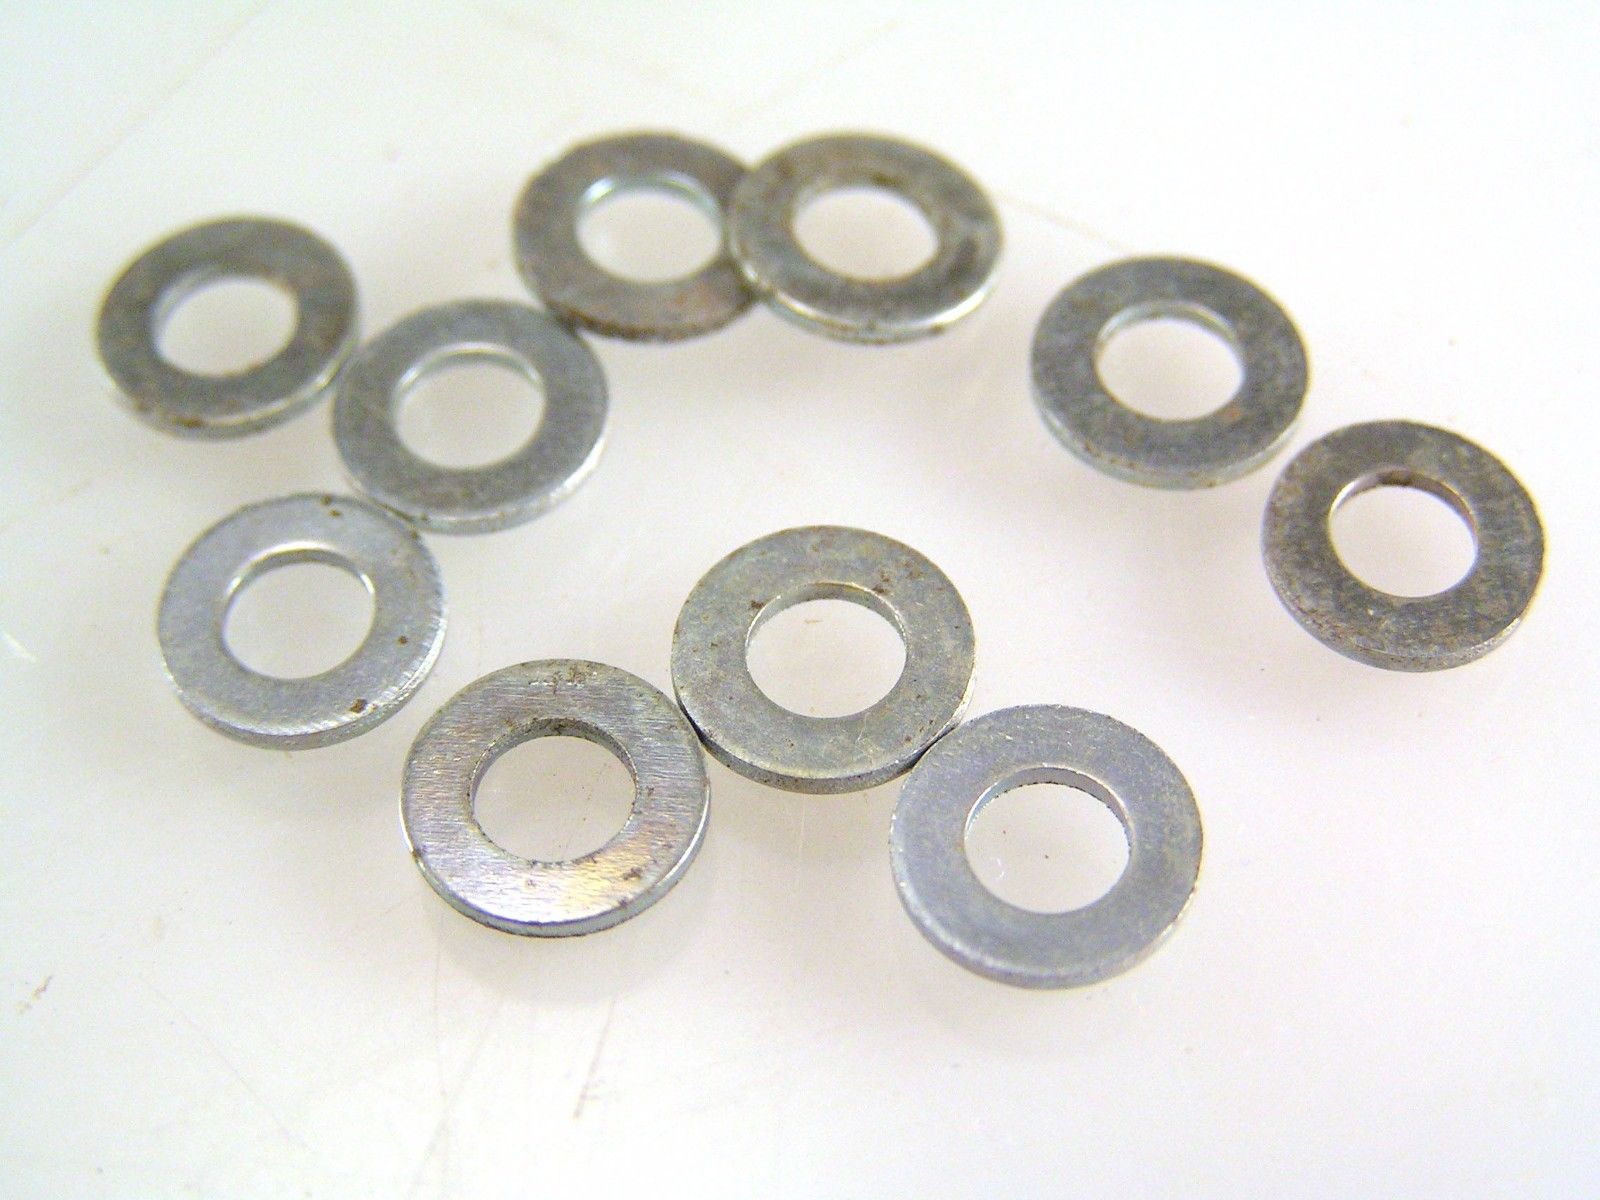 PLAIN WASHER 6BA Mild Steel Zinc Clear Passivated 10 Pieces MBE005c